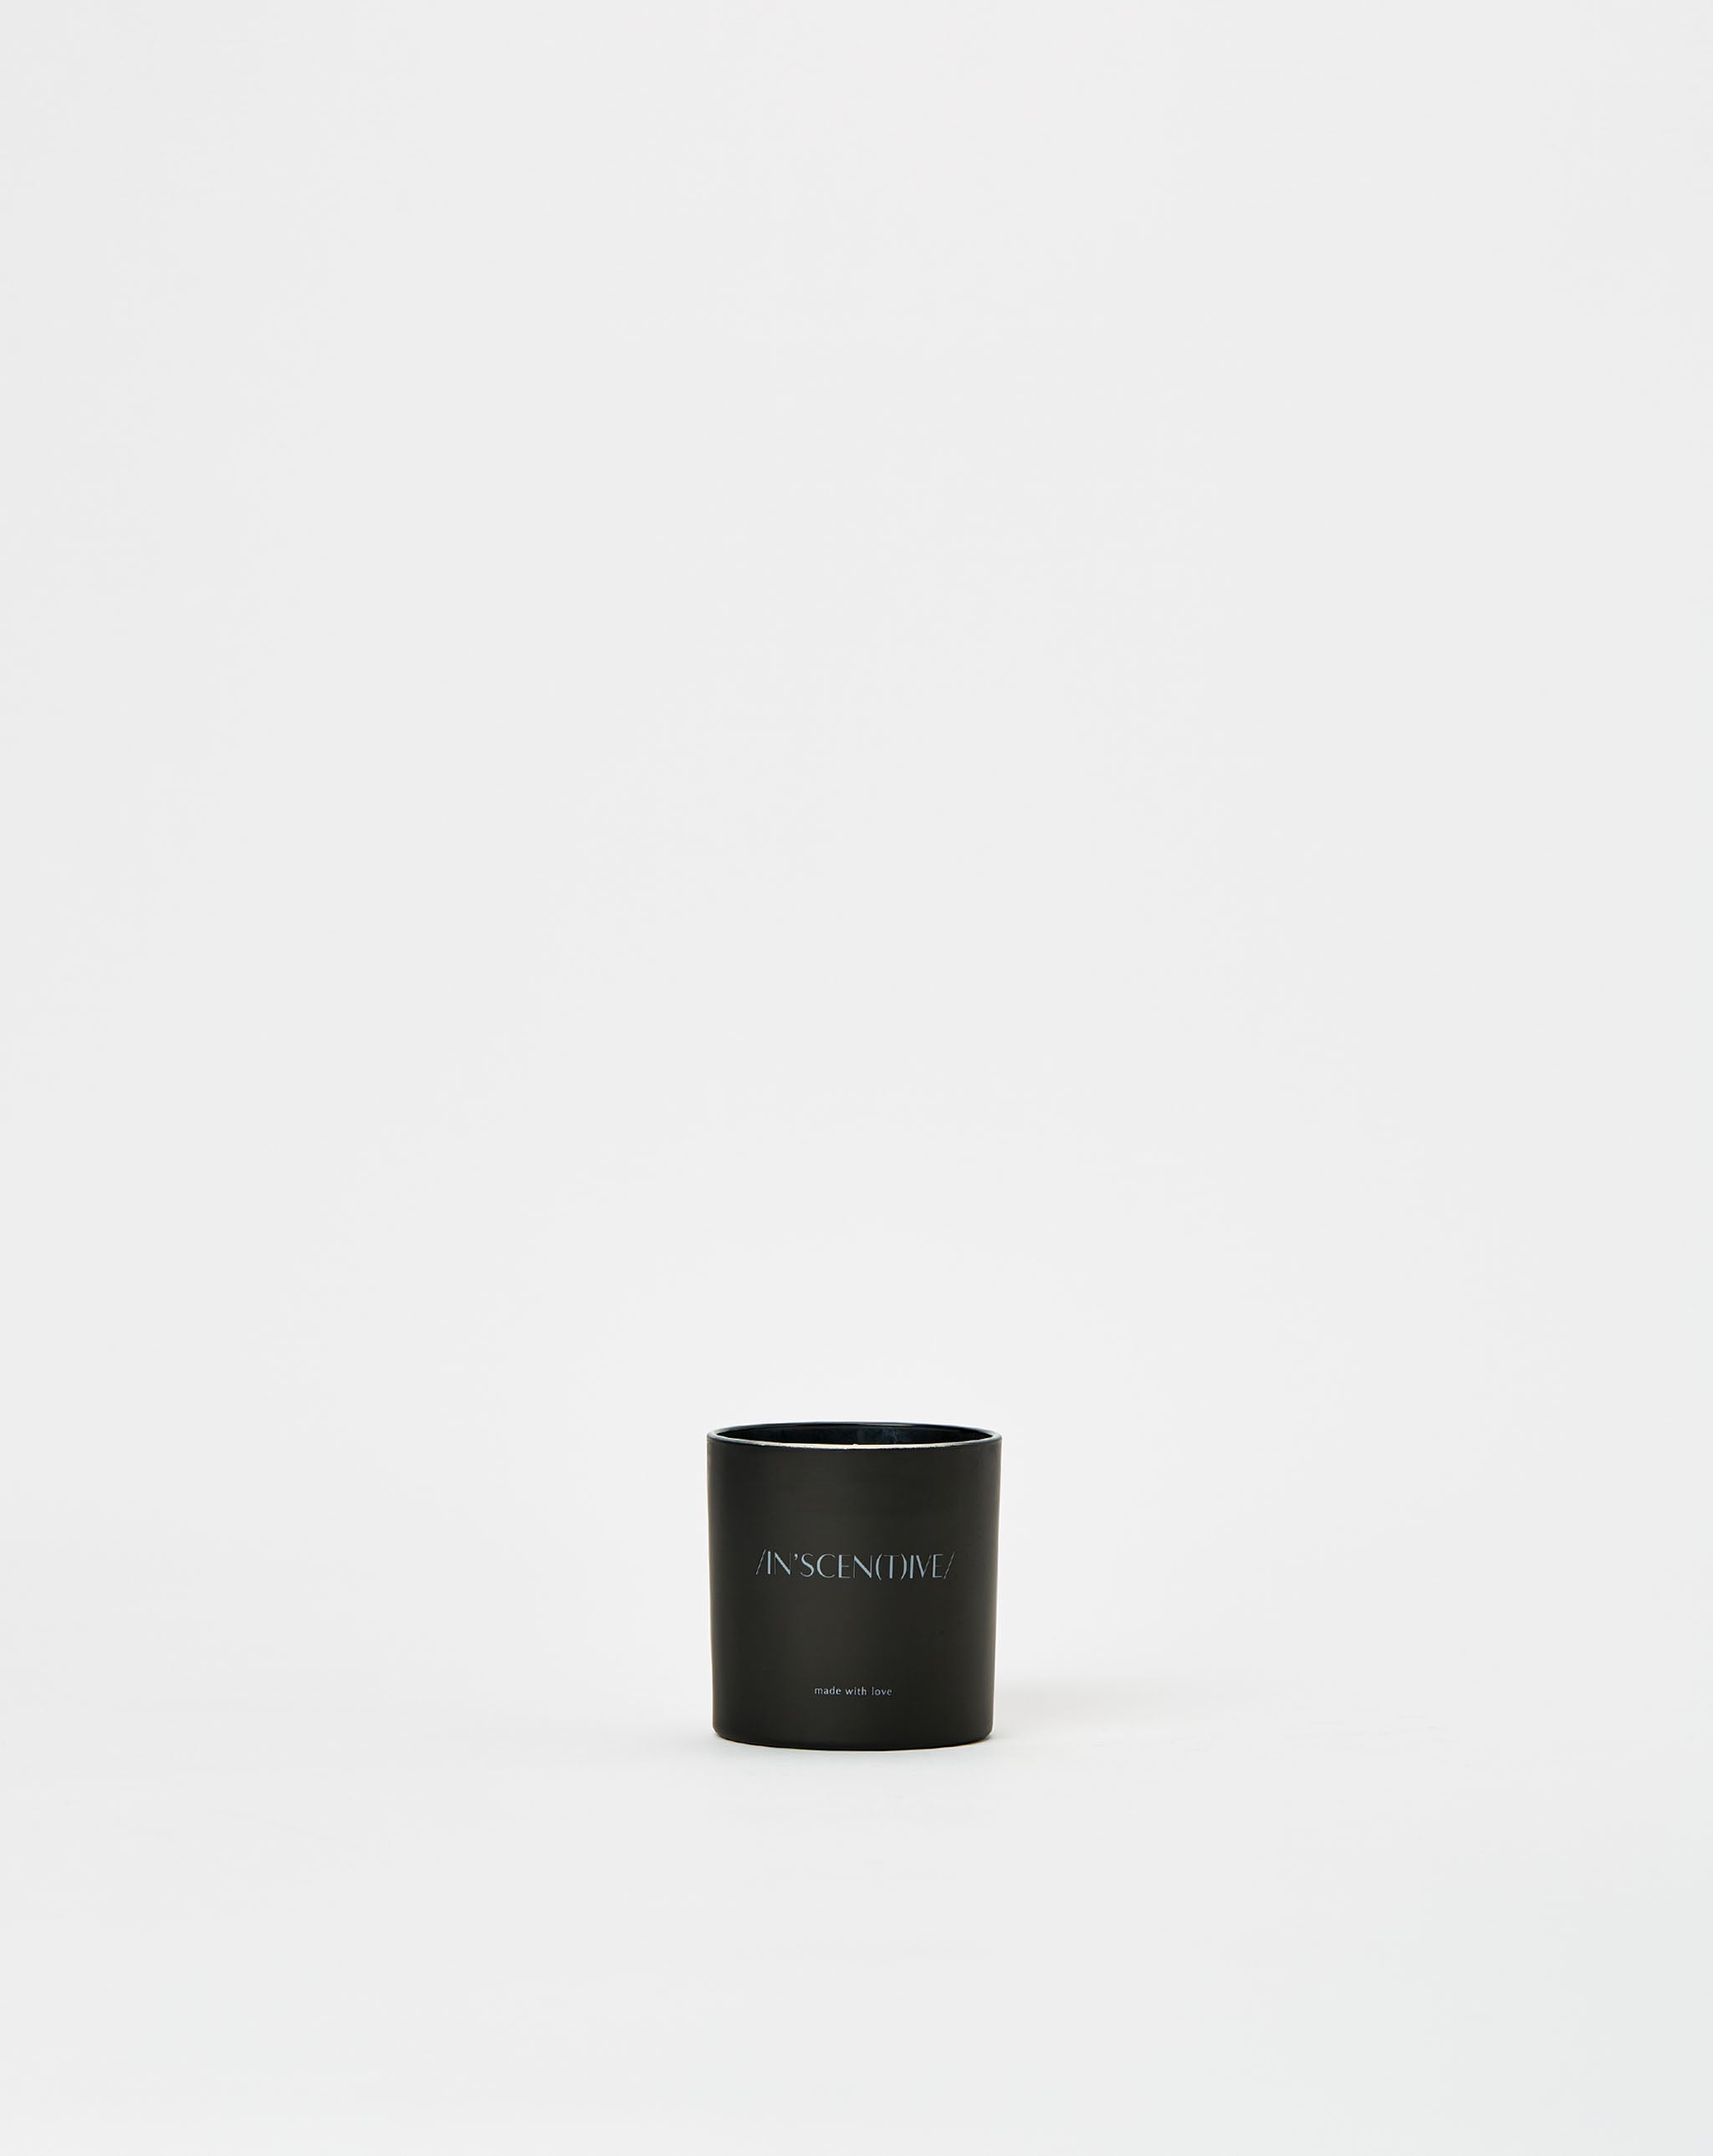 /IN'SCEN(T)IVE/ Grounded Candle  - Cheap Urlfreeze Jordan outlet